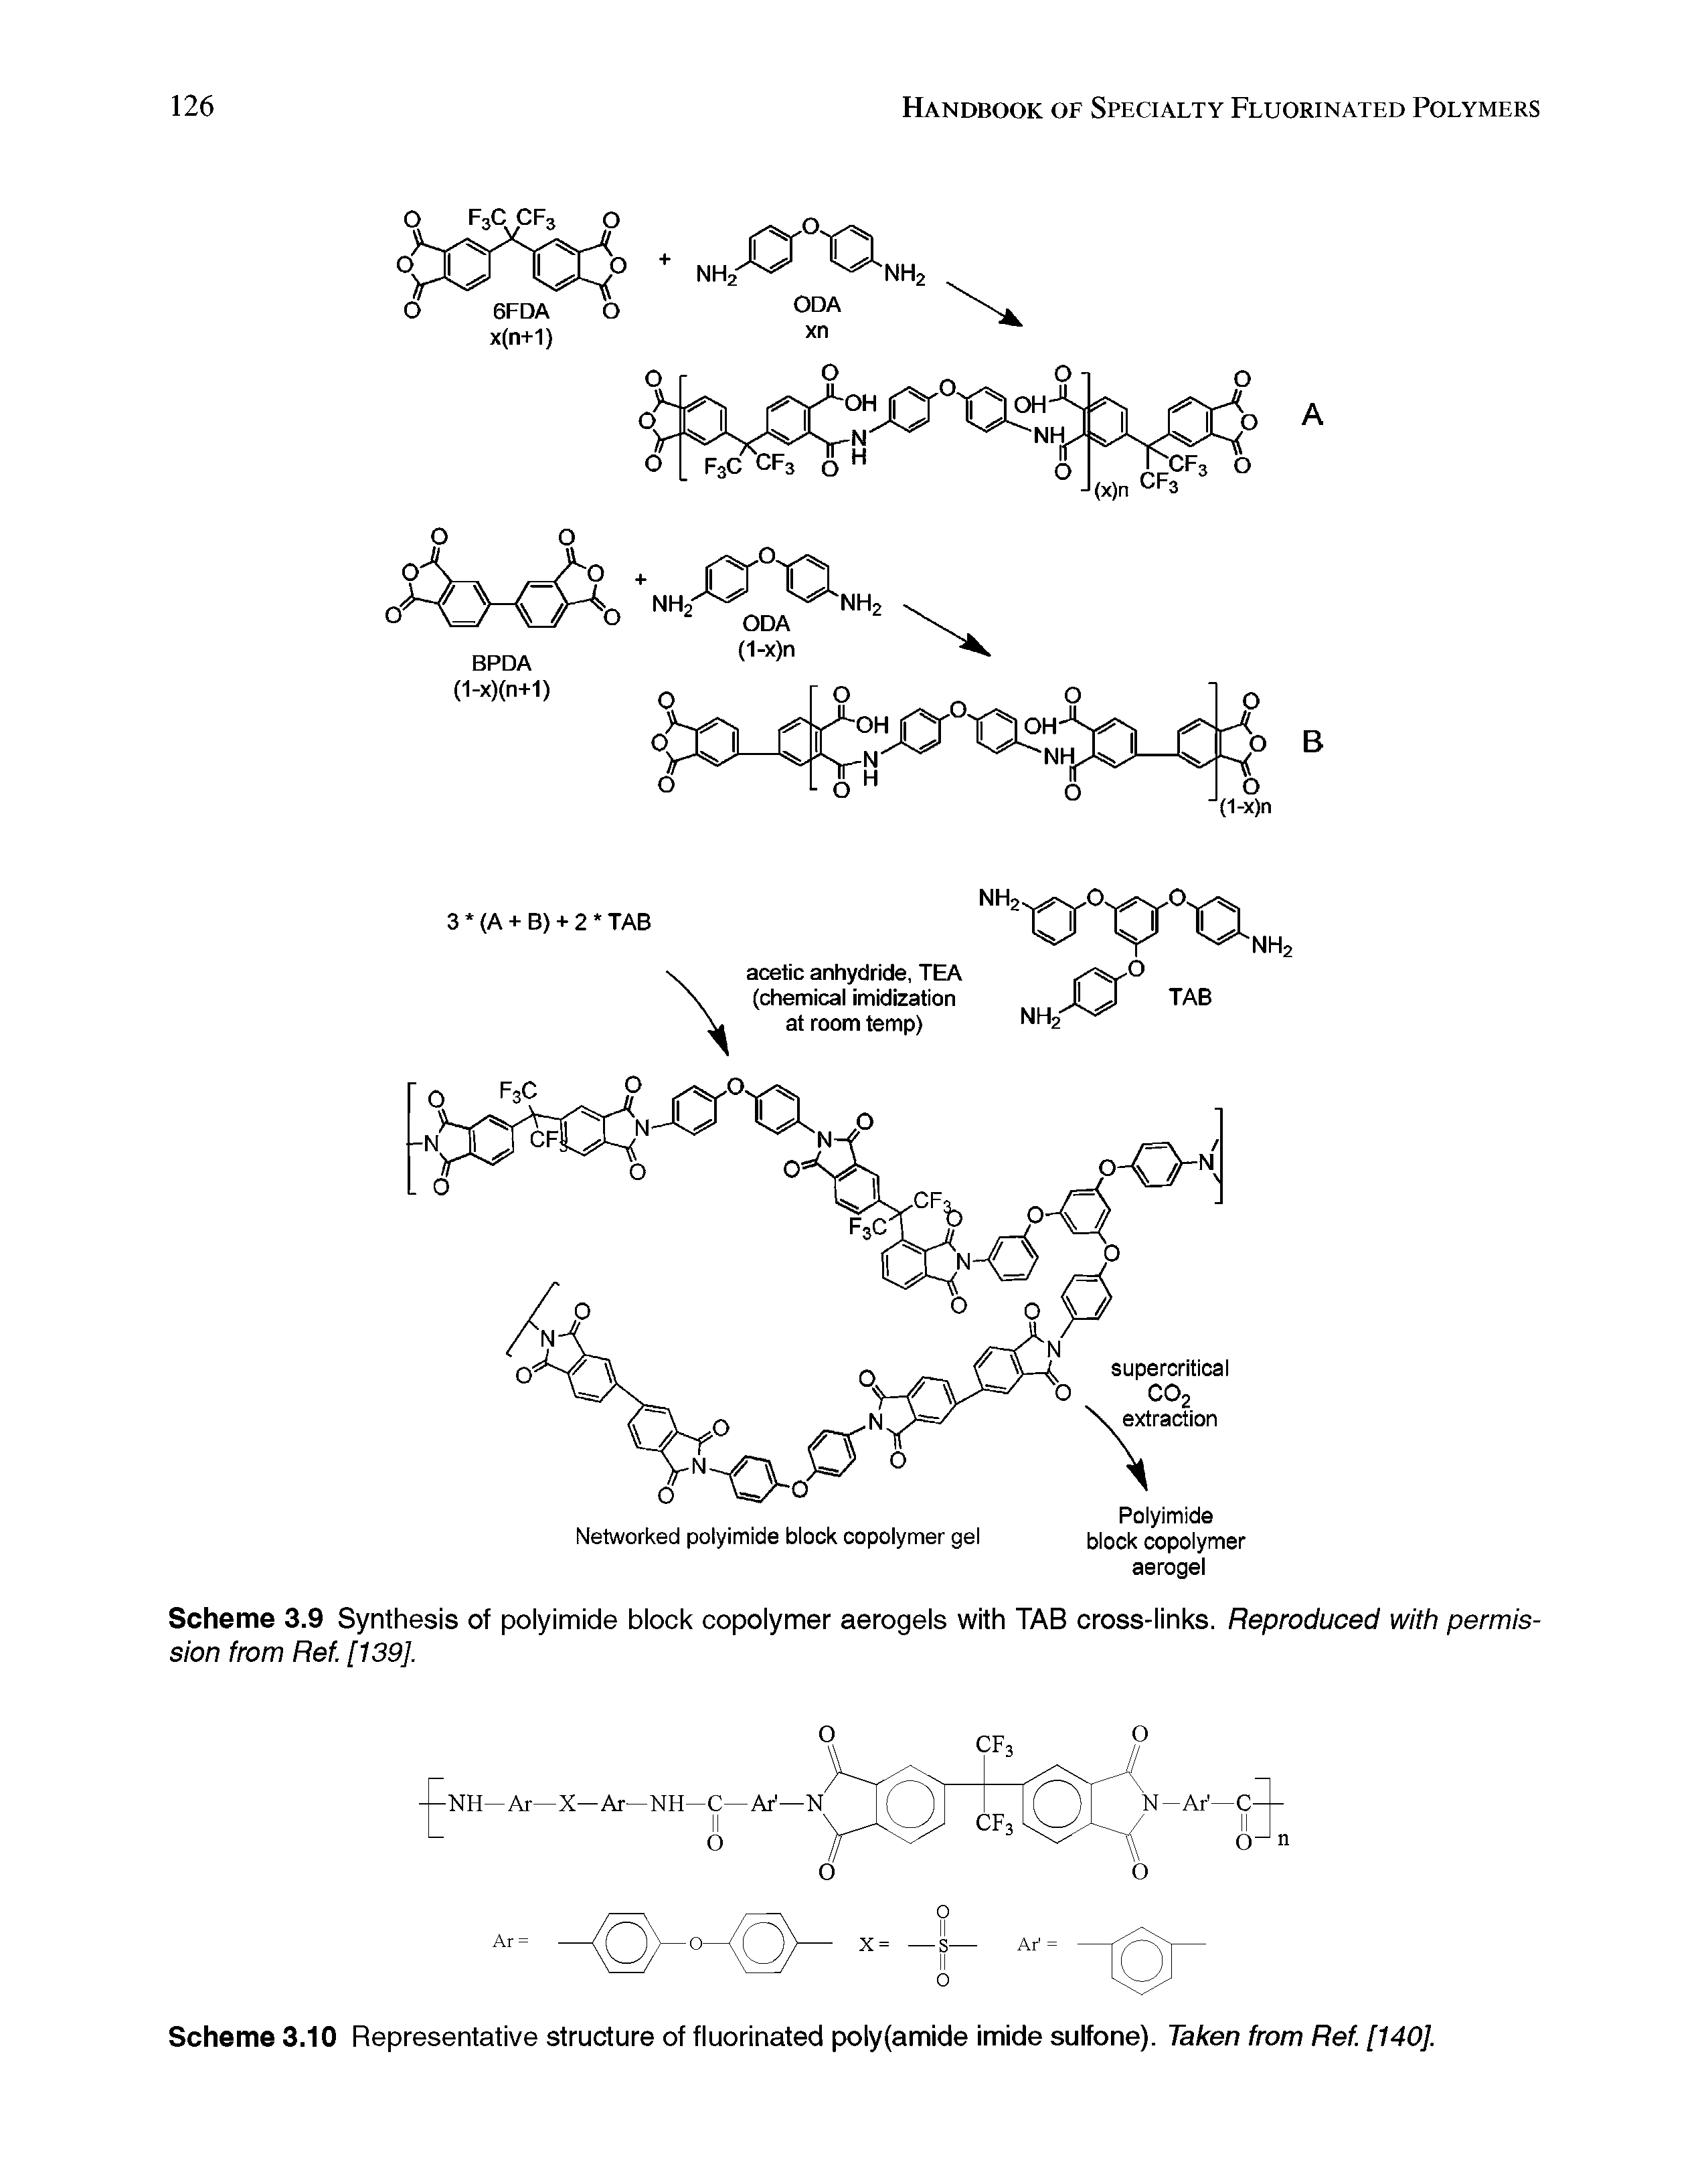 Scheme 3.9 Synthesis of polyimide block copolymer aerogels with TAB cross-links. Reproduced with permission from Ref. [139],...